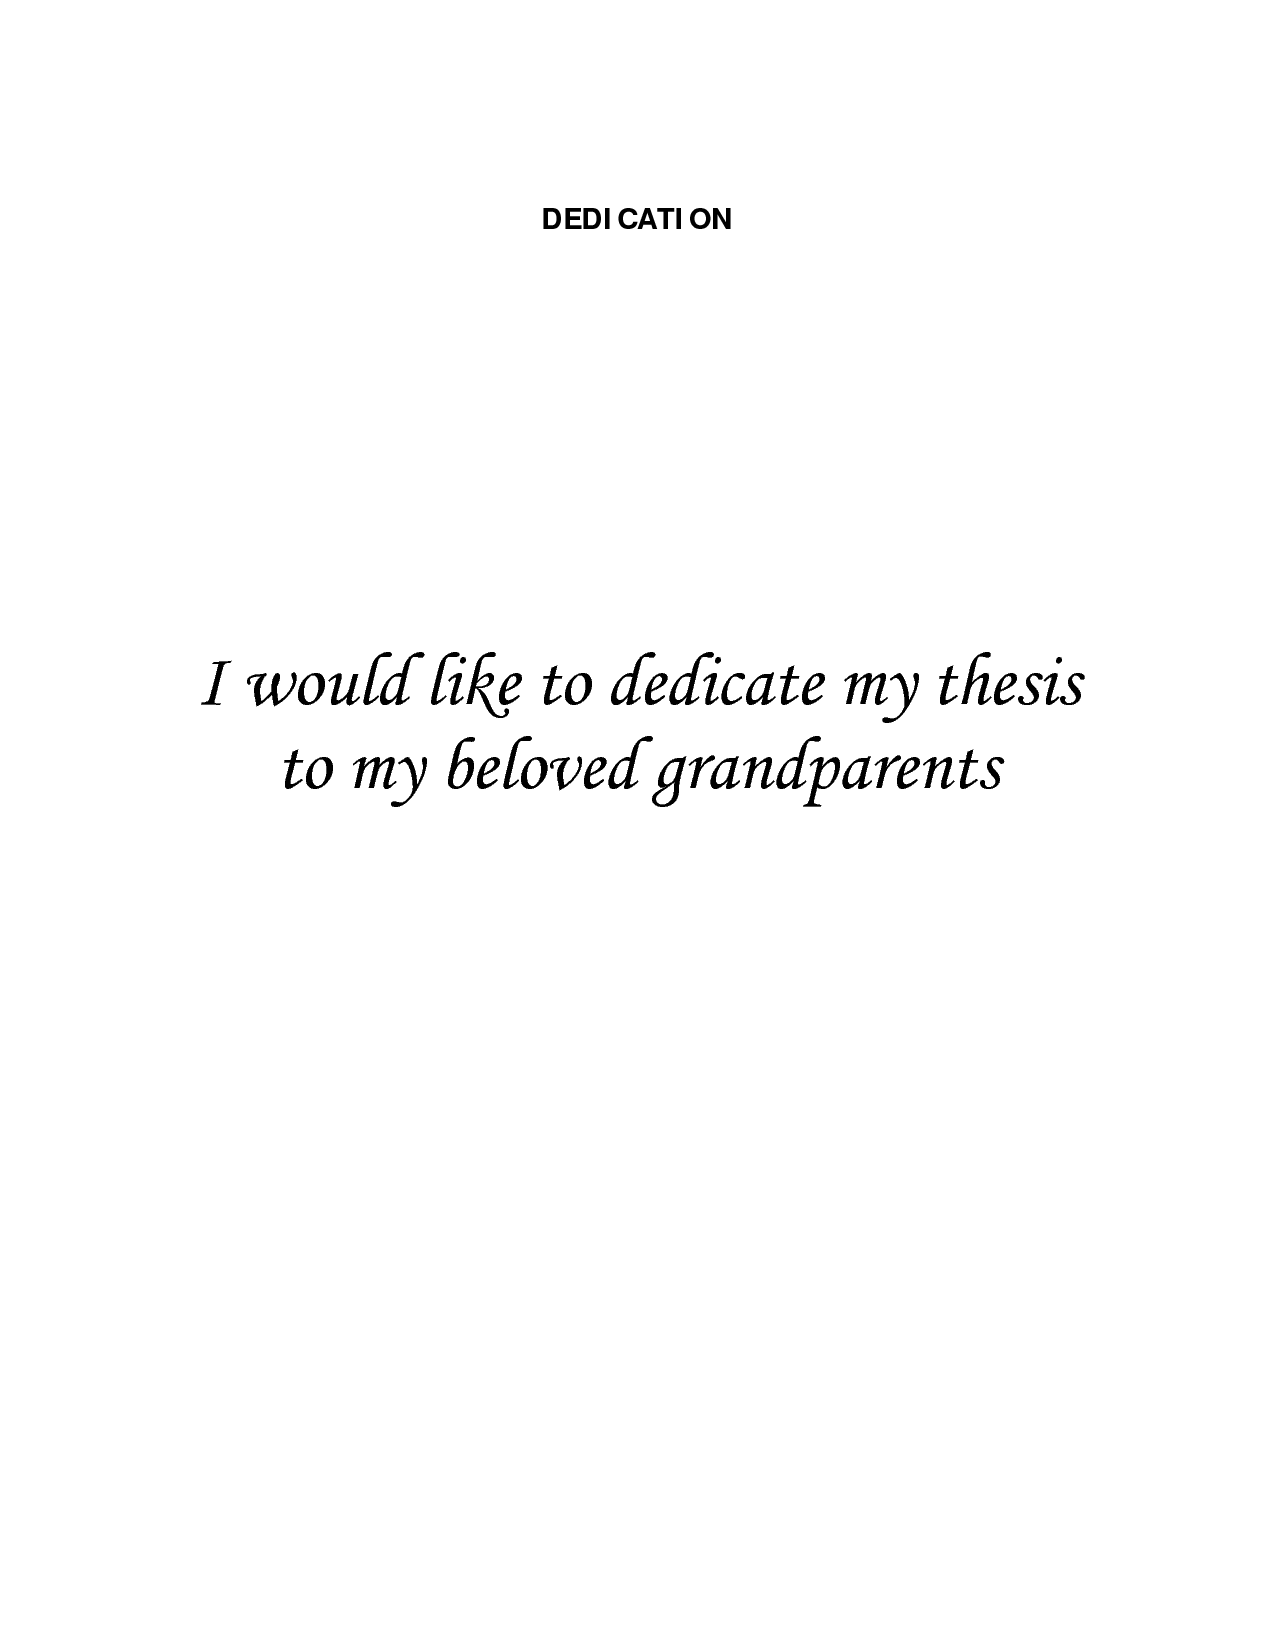 Best Dedication For Master Thesis